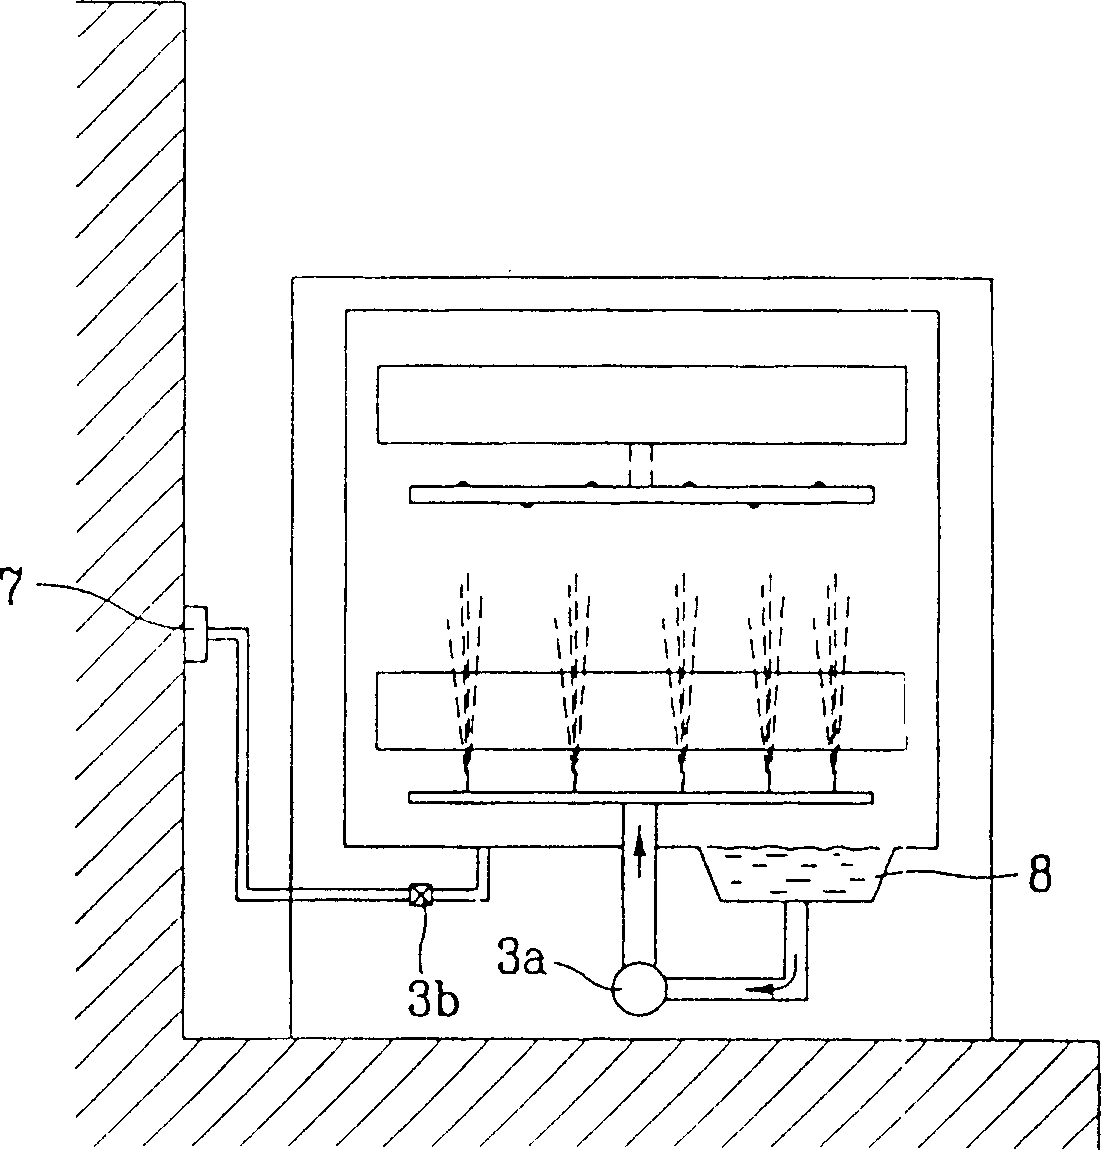 Method for controlling operation of disch washing machine according to turbidity of washing water